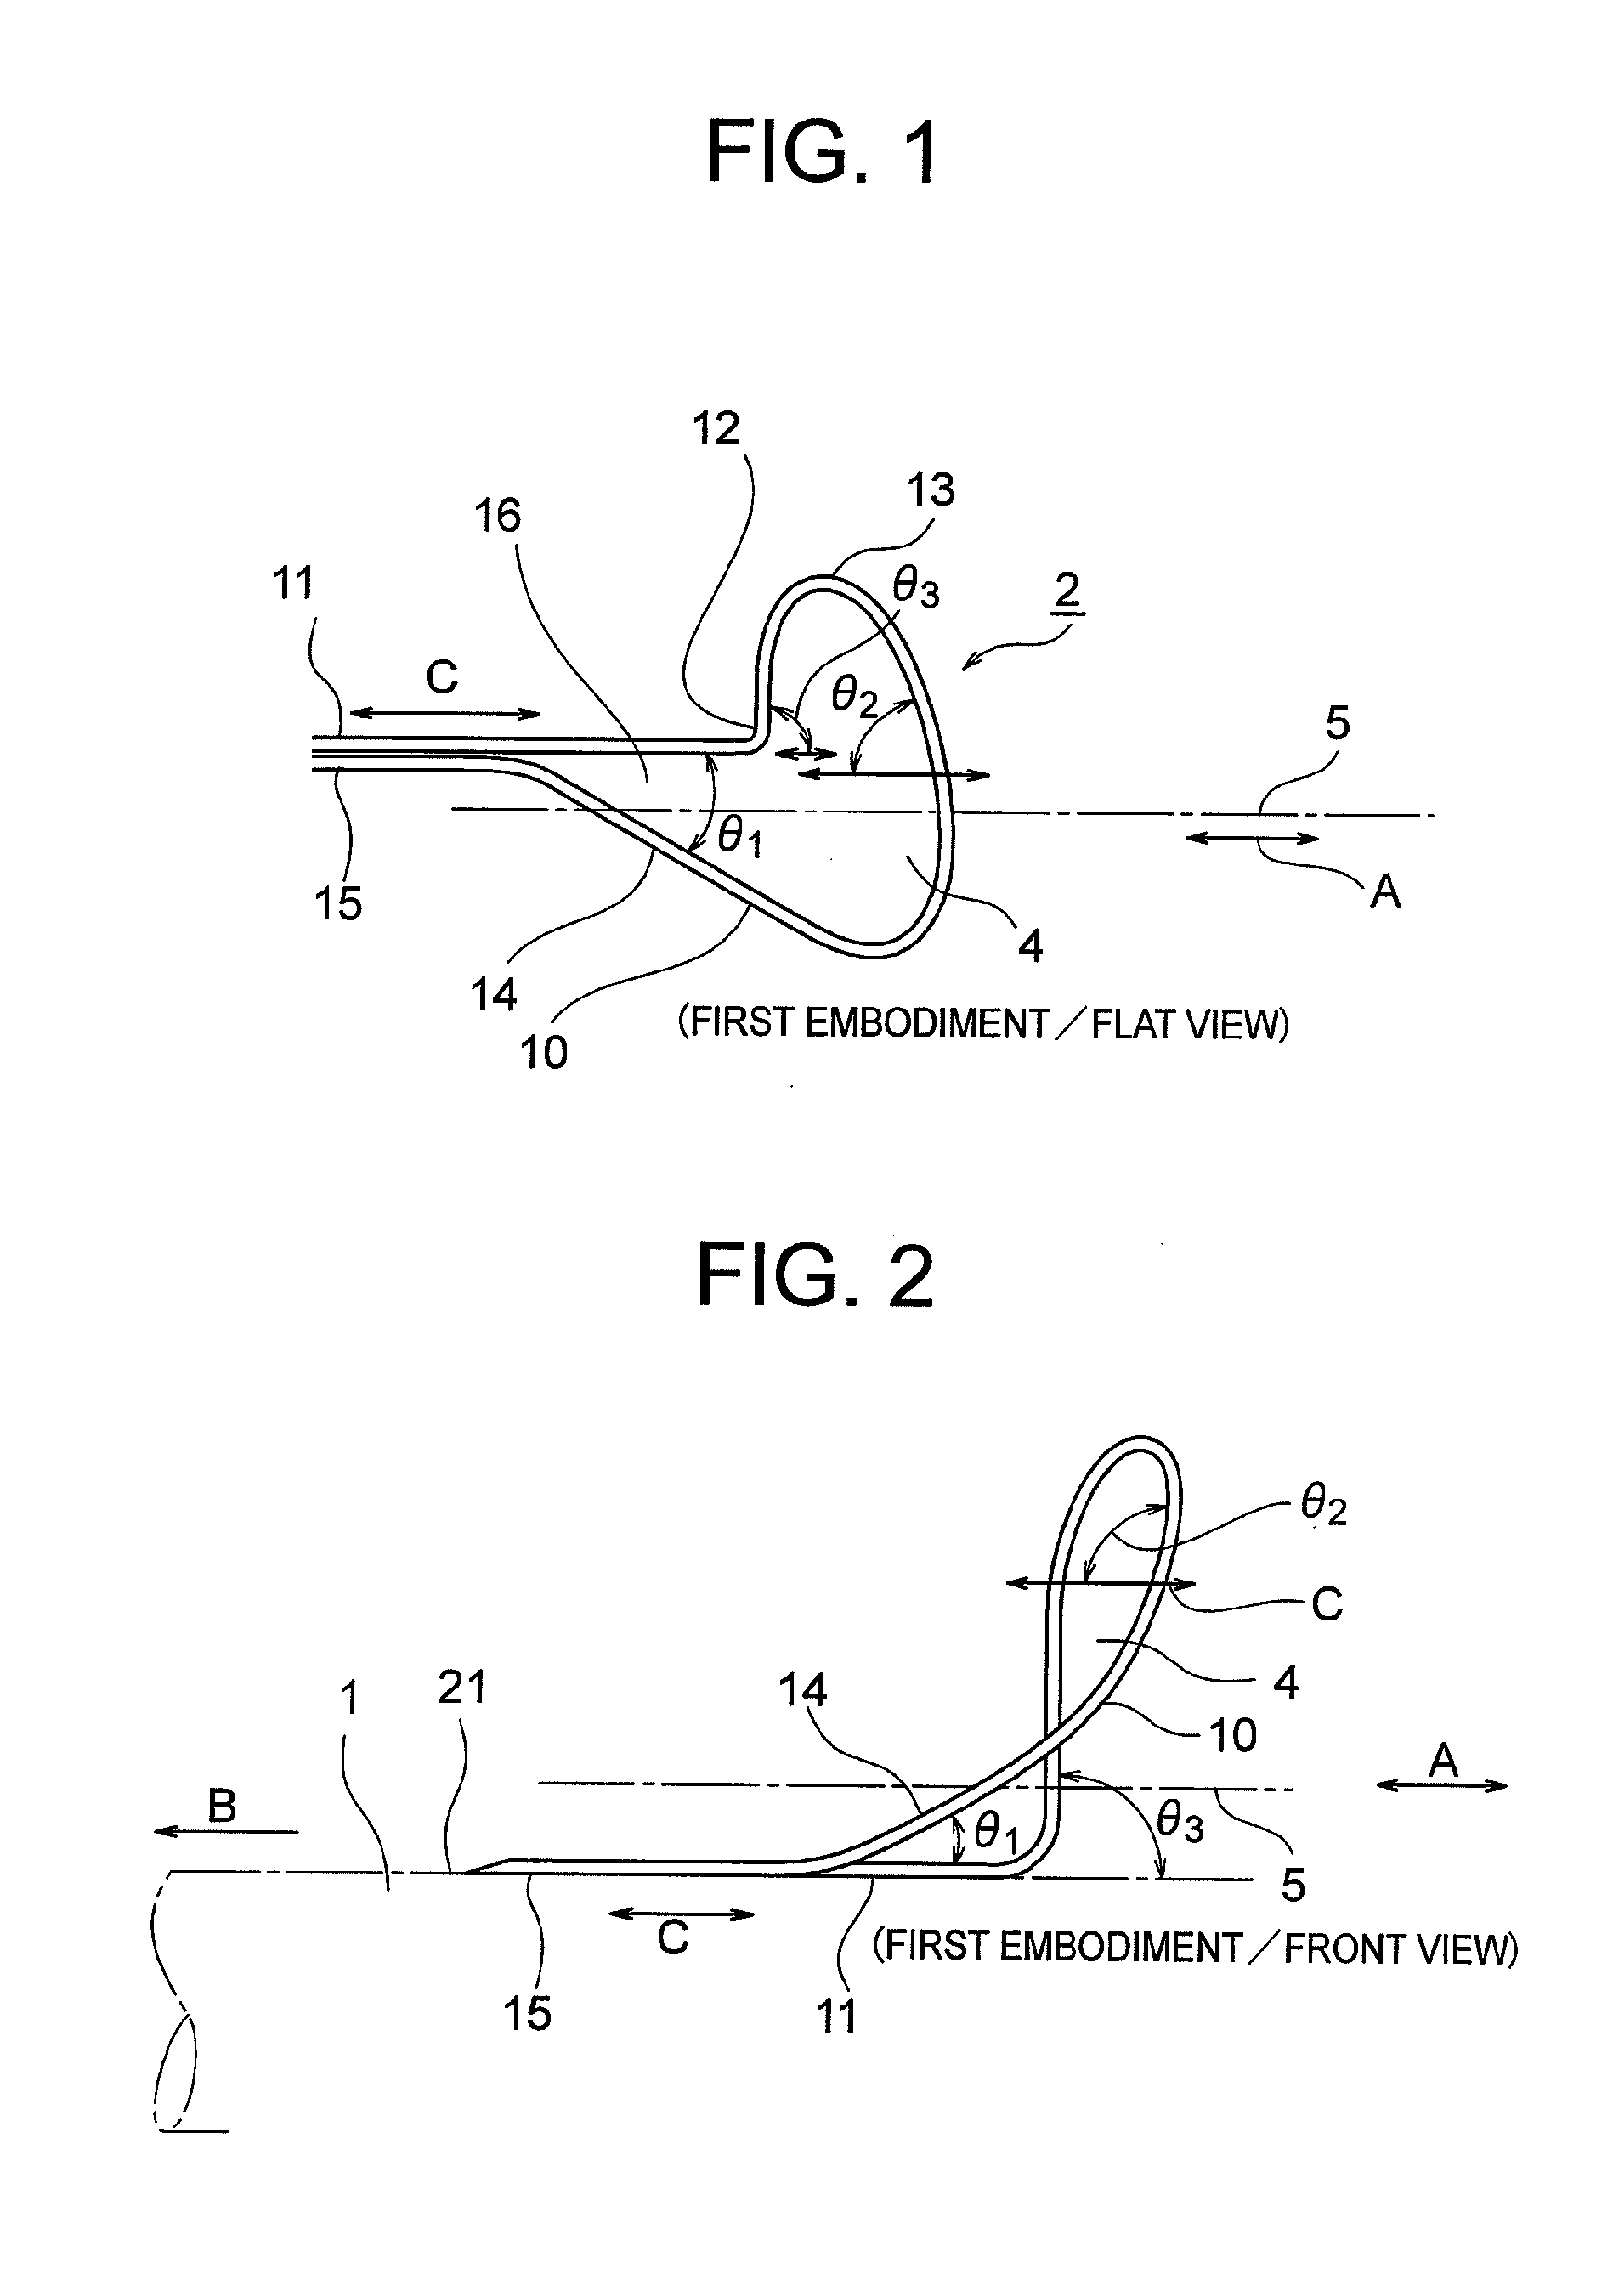 Asymmetric one-legged wire guide for fishing rod